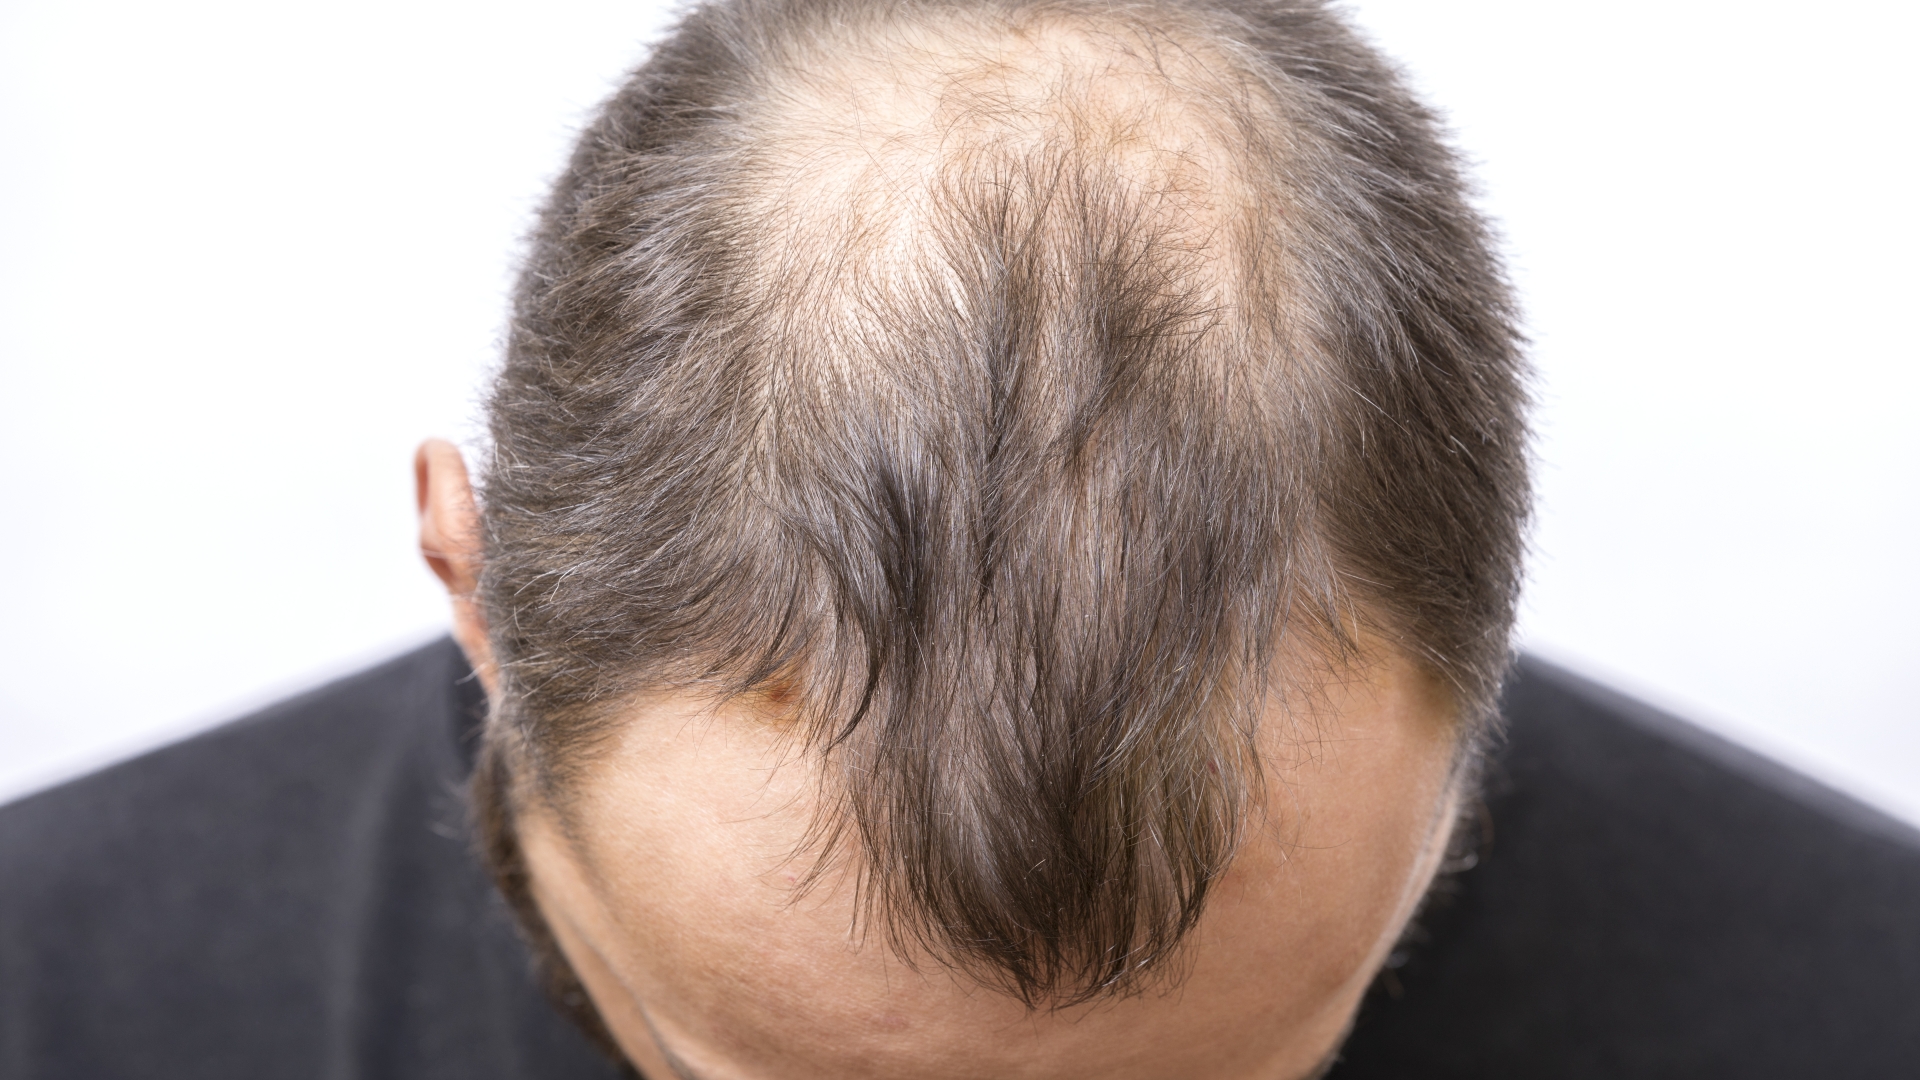 The simple patch that could ‘cure’ your baldness is a hope for thousands